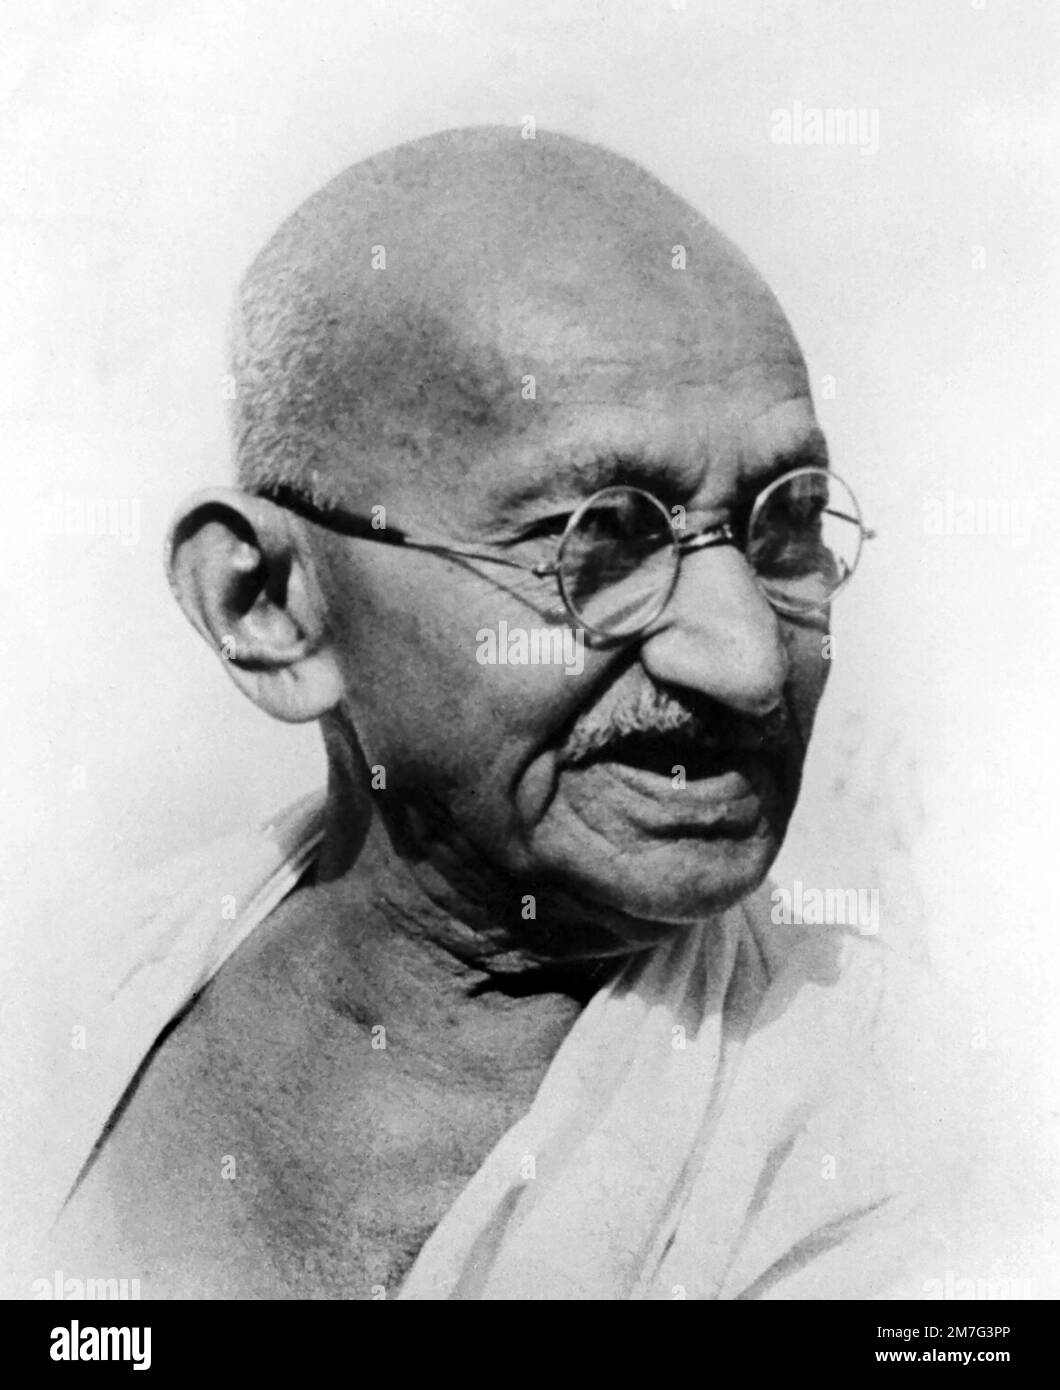 Mahatma Gandhi. Portrait of Mohandas Karamchand Gandhi (1869-1948),  widely known as Mahatma Gandhi. Photograph most probably taken in the early 1940s Stock Photo